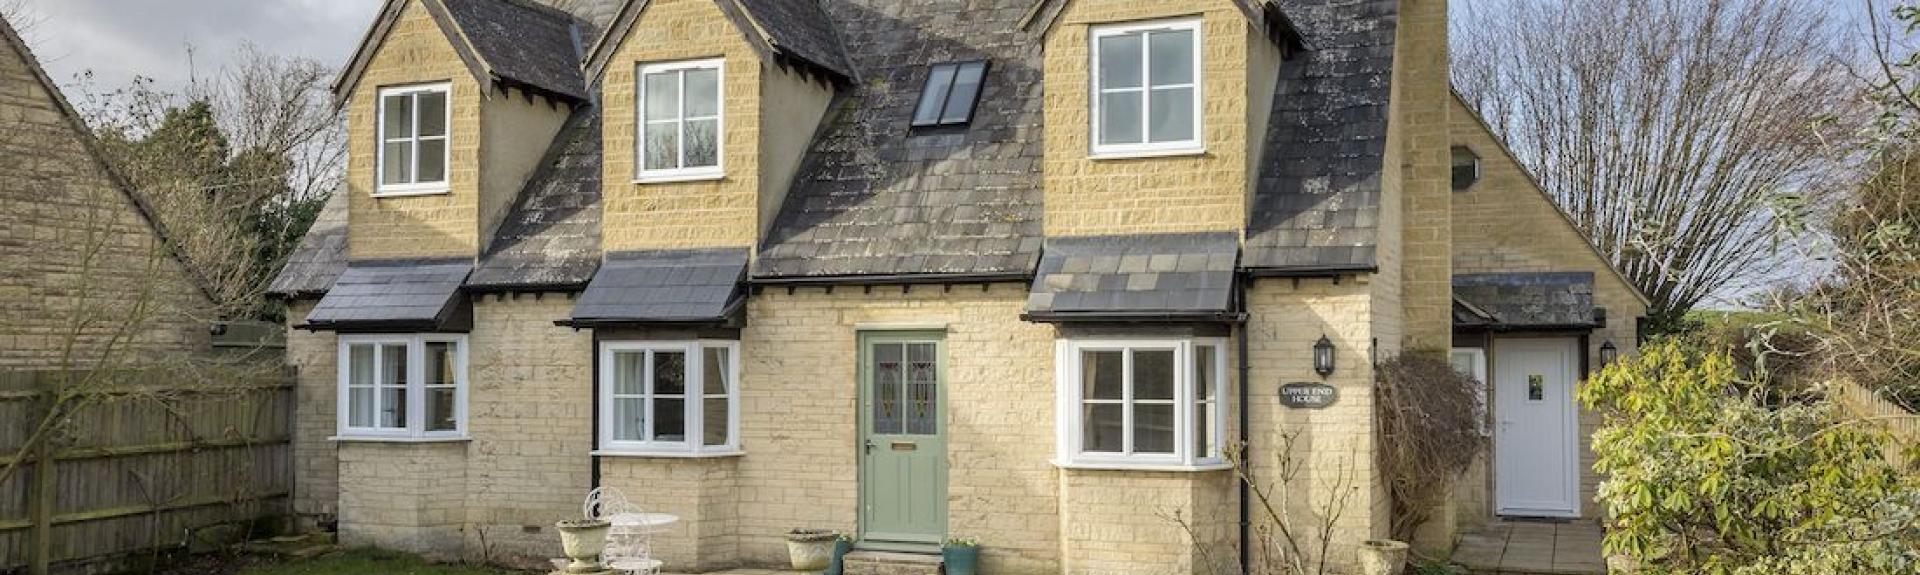 Exterior or a modern Cotswold honeystone house with triple bay windows